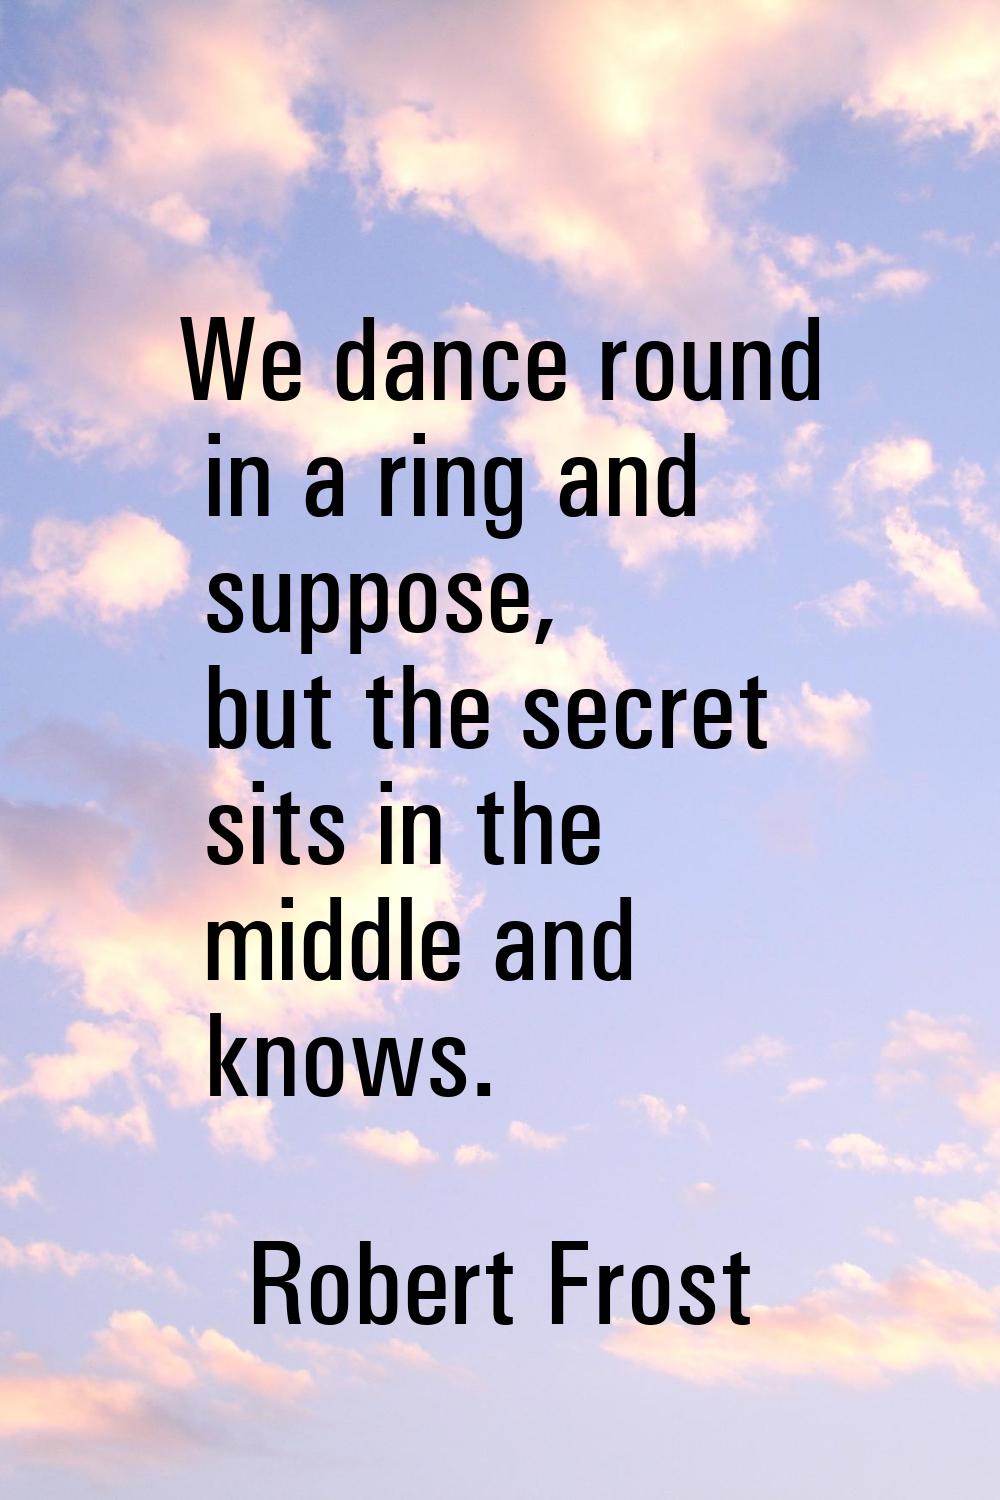 We dance round in a ring and suppose, but the secret sits in the middle and knows.